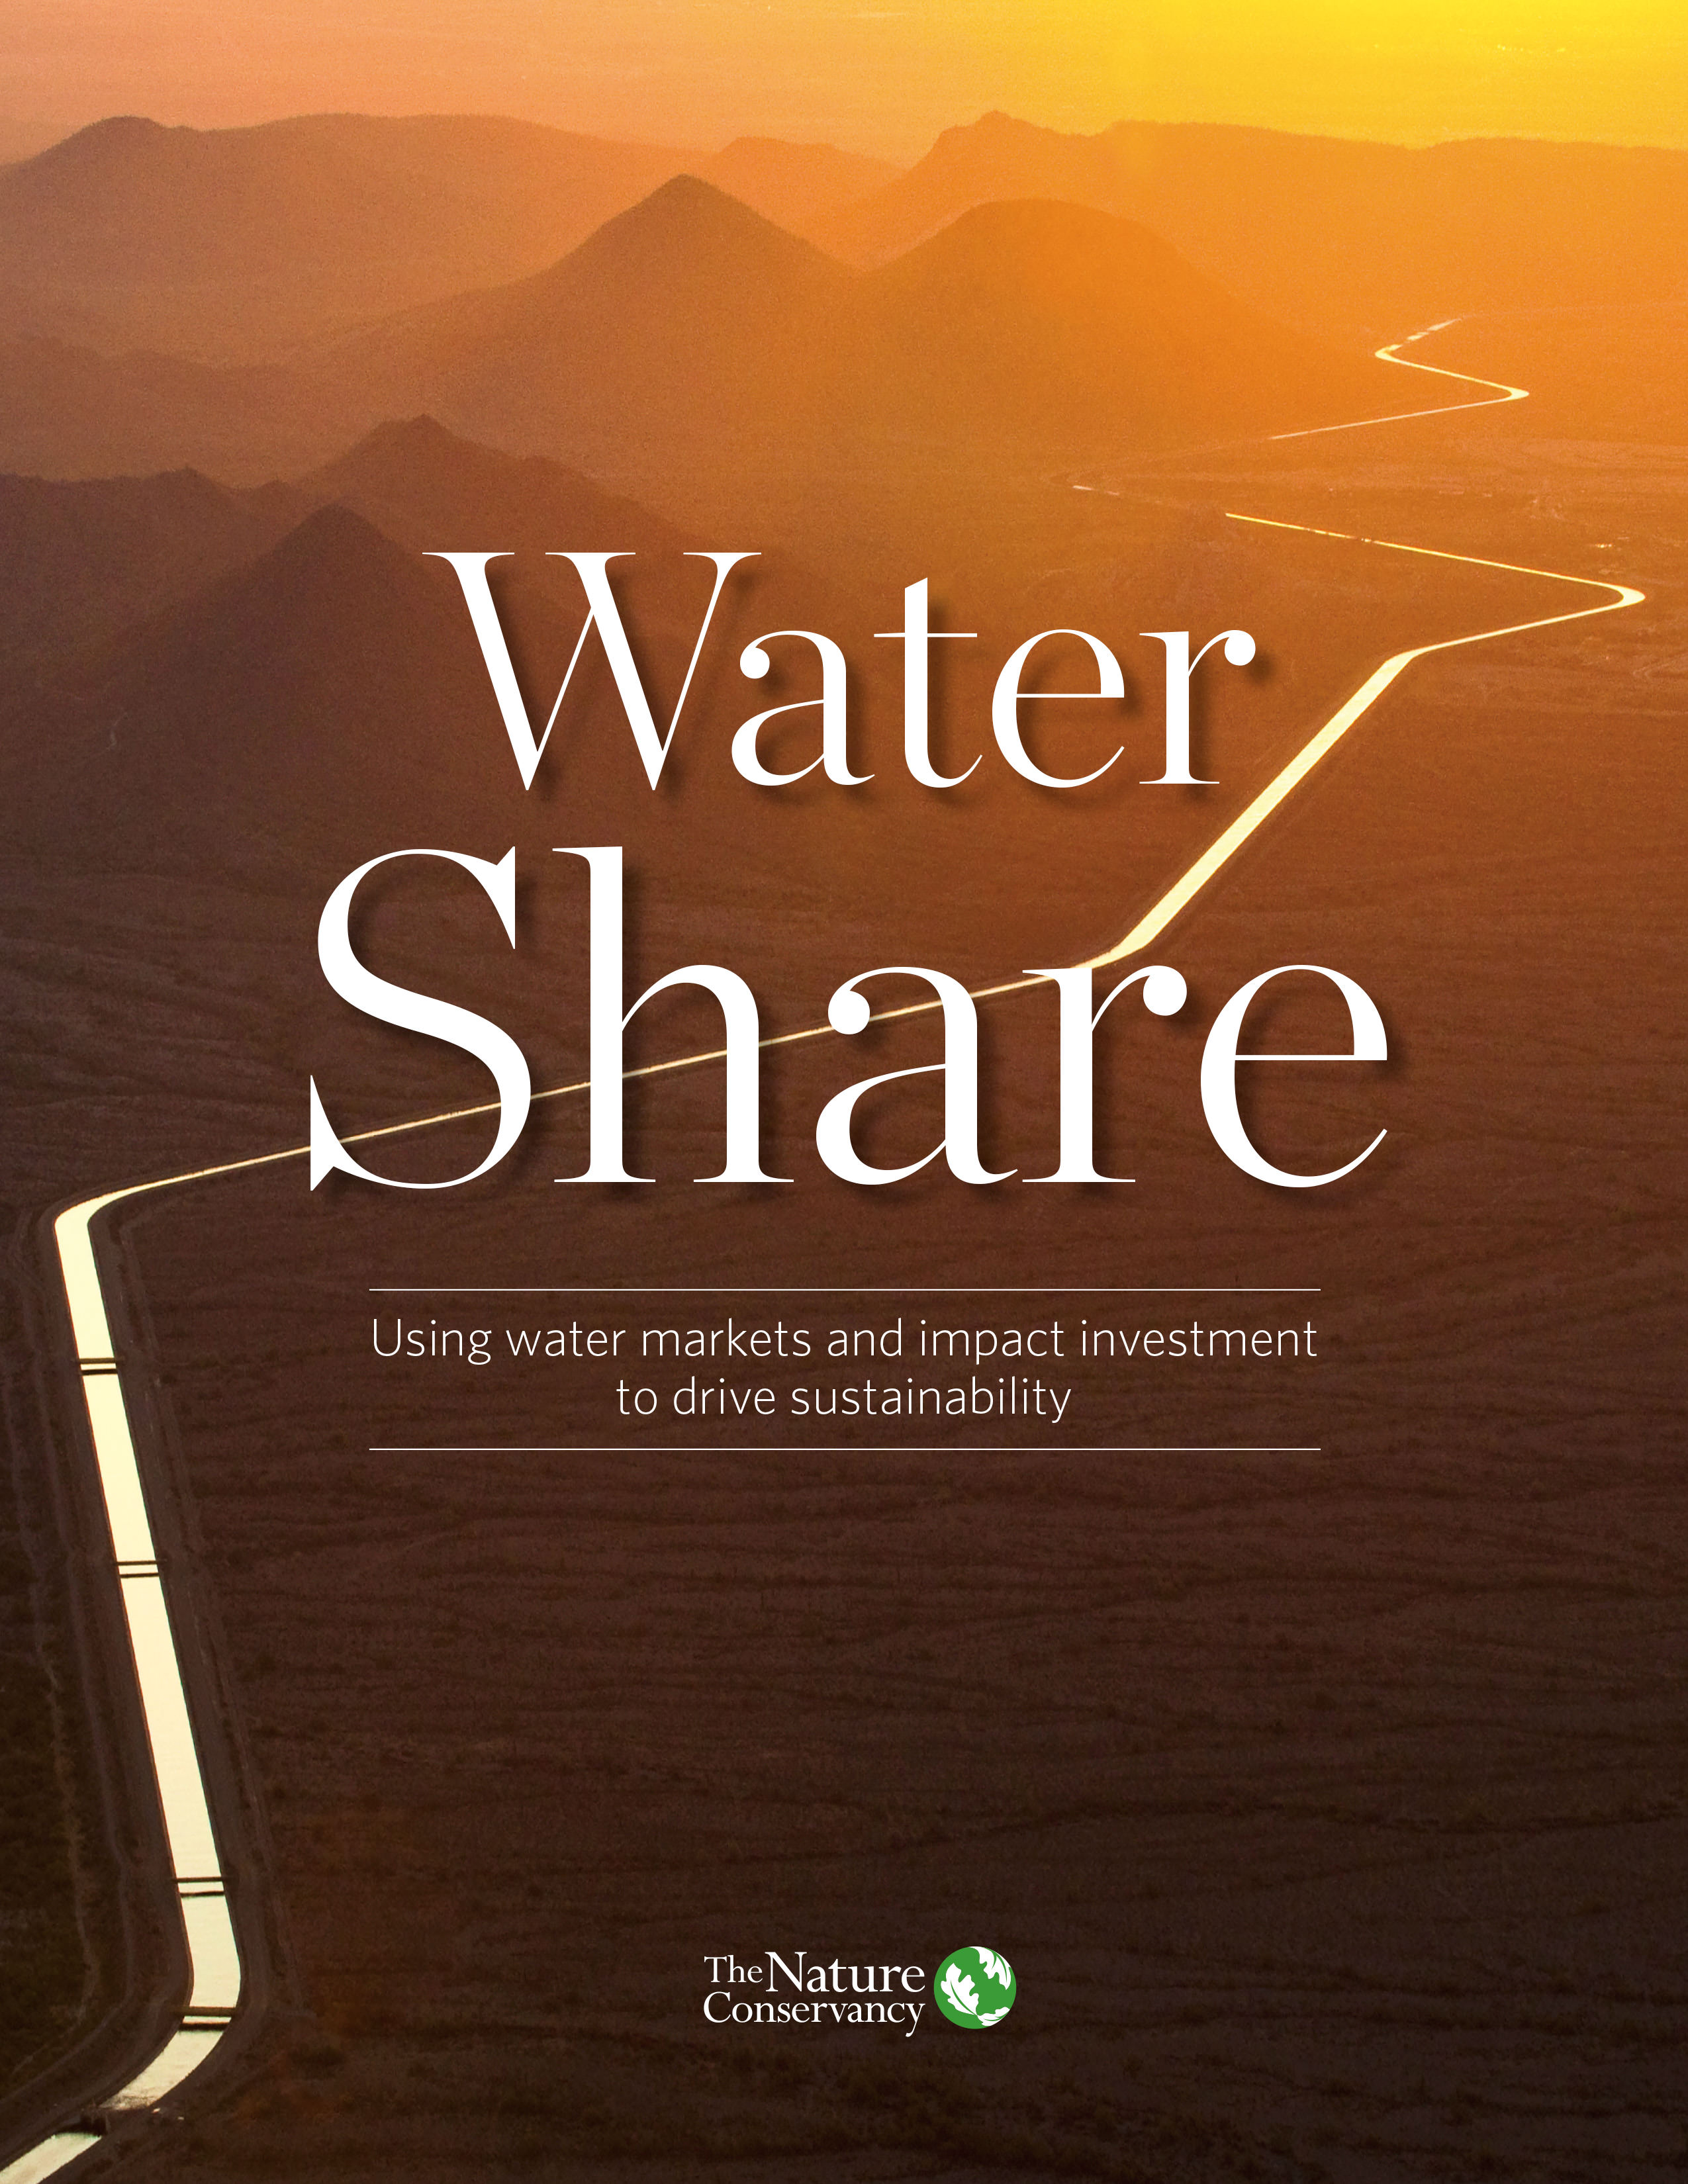 Using water markets and impact investment to drive sustainability.